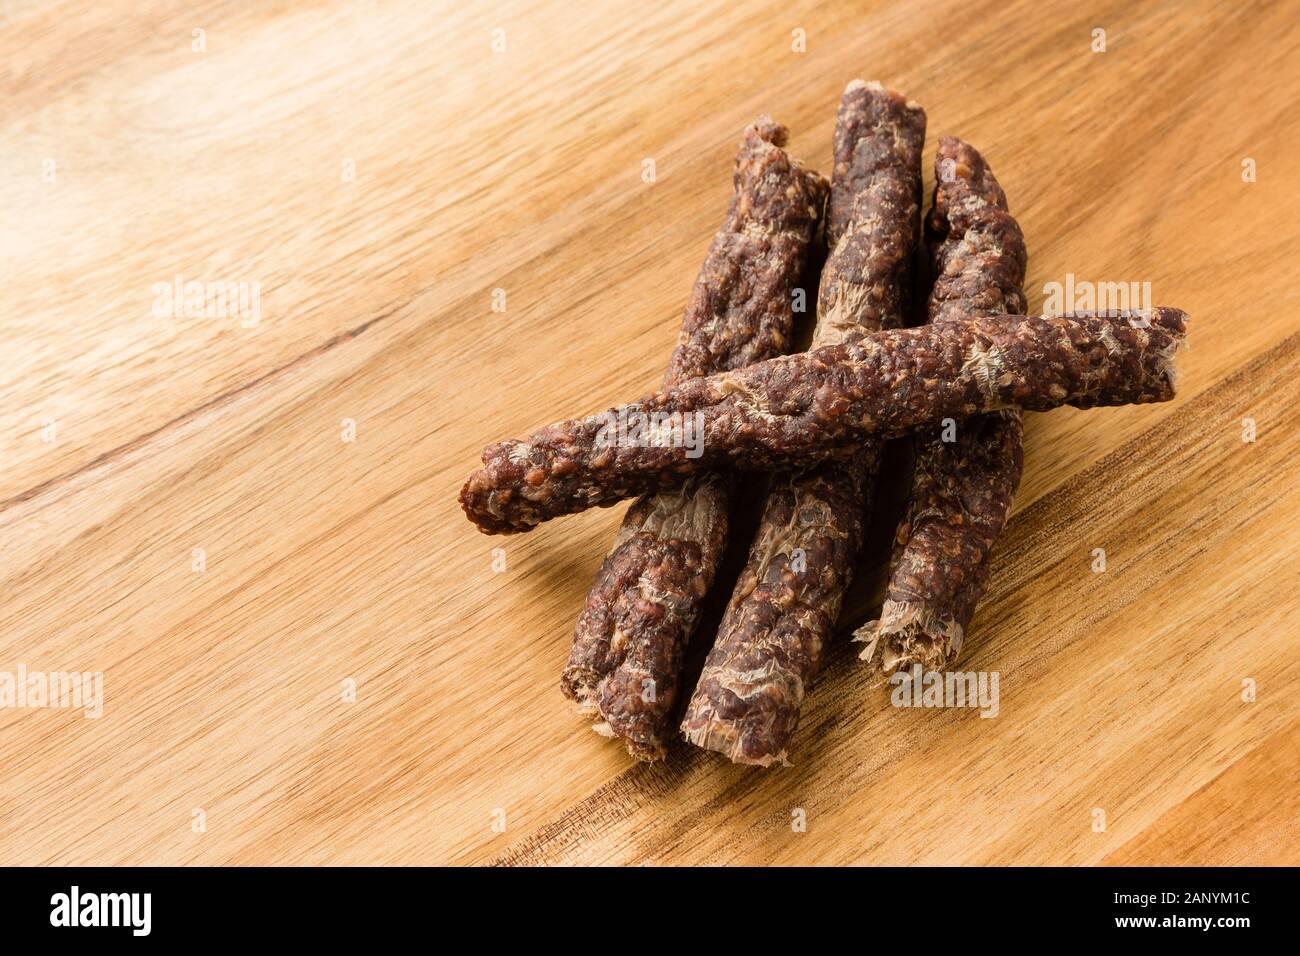 Sticks of traditional African droewors on a wooden surface Stock Photo